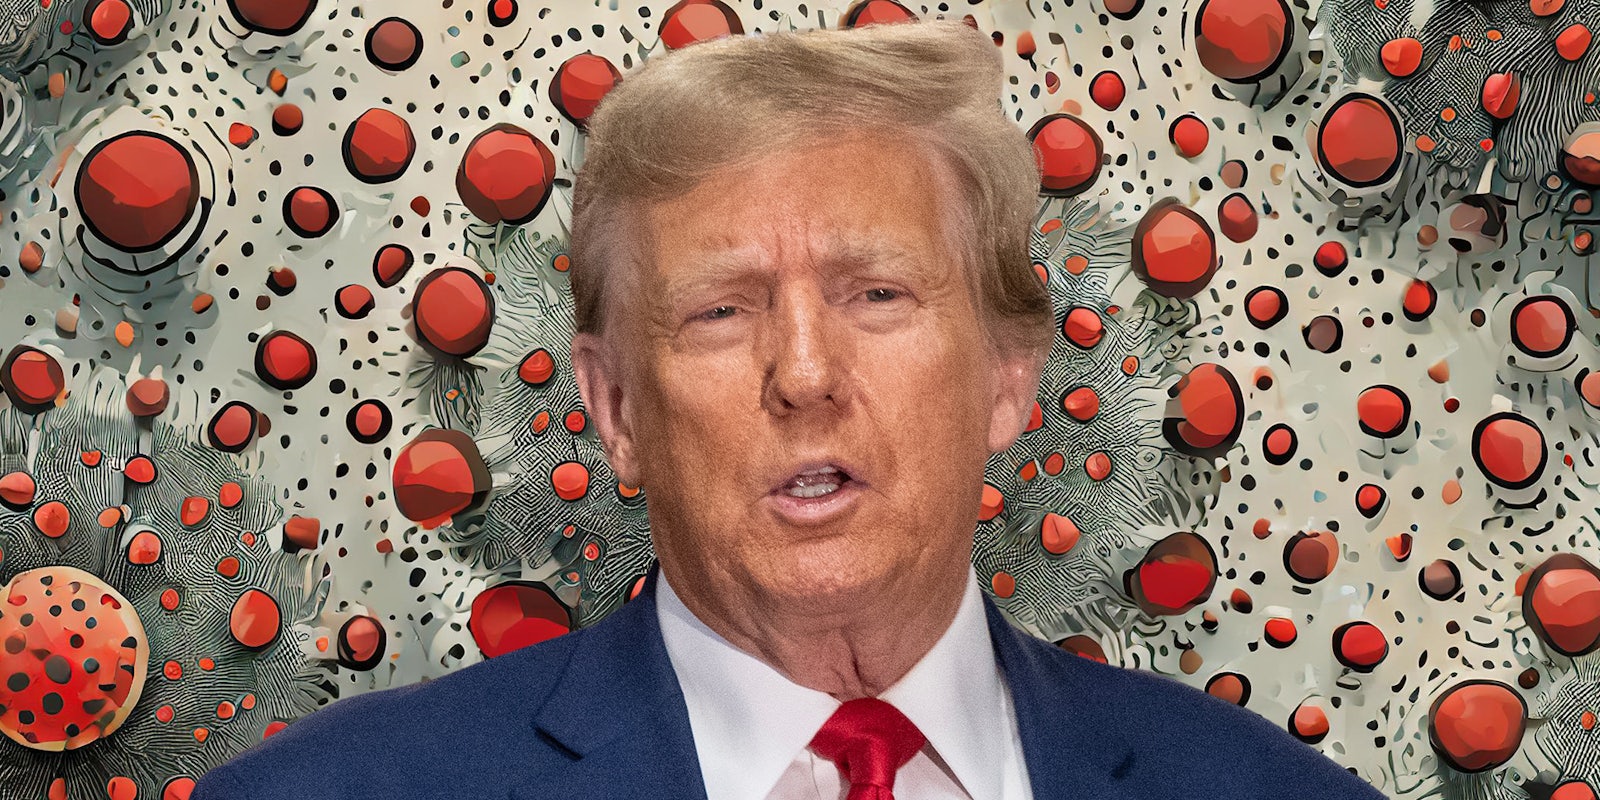 Former President Donald Trump over background of red spots